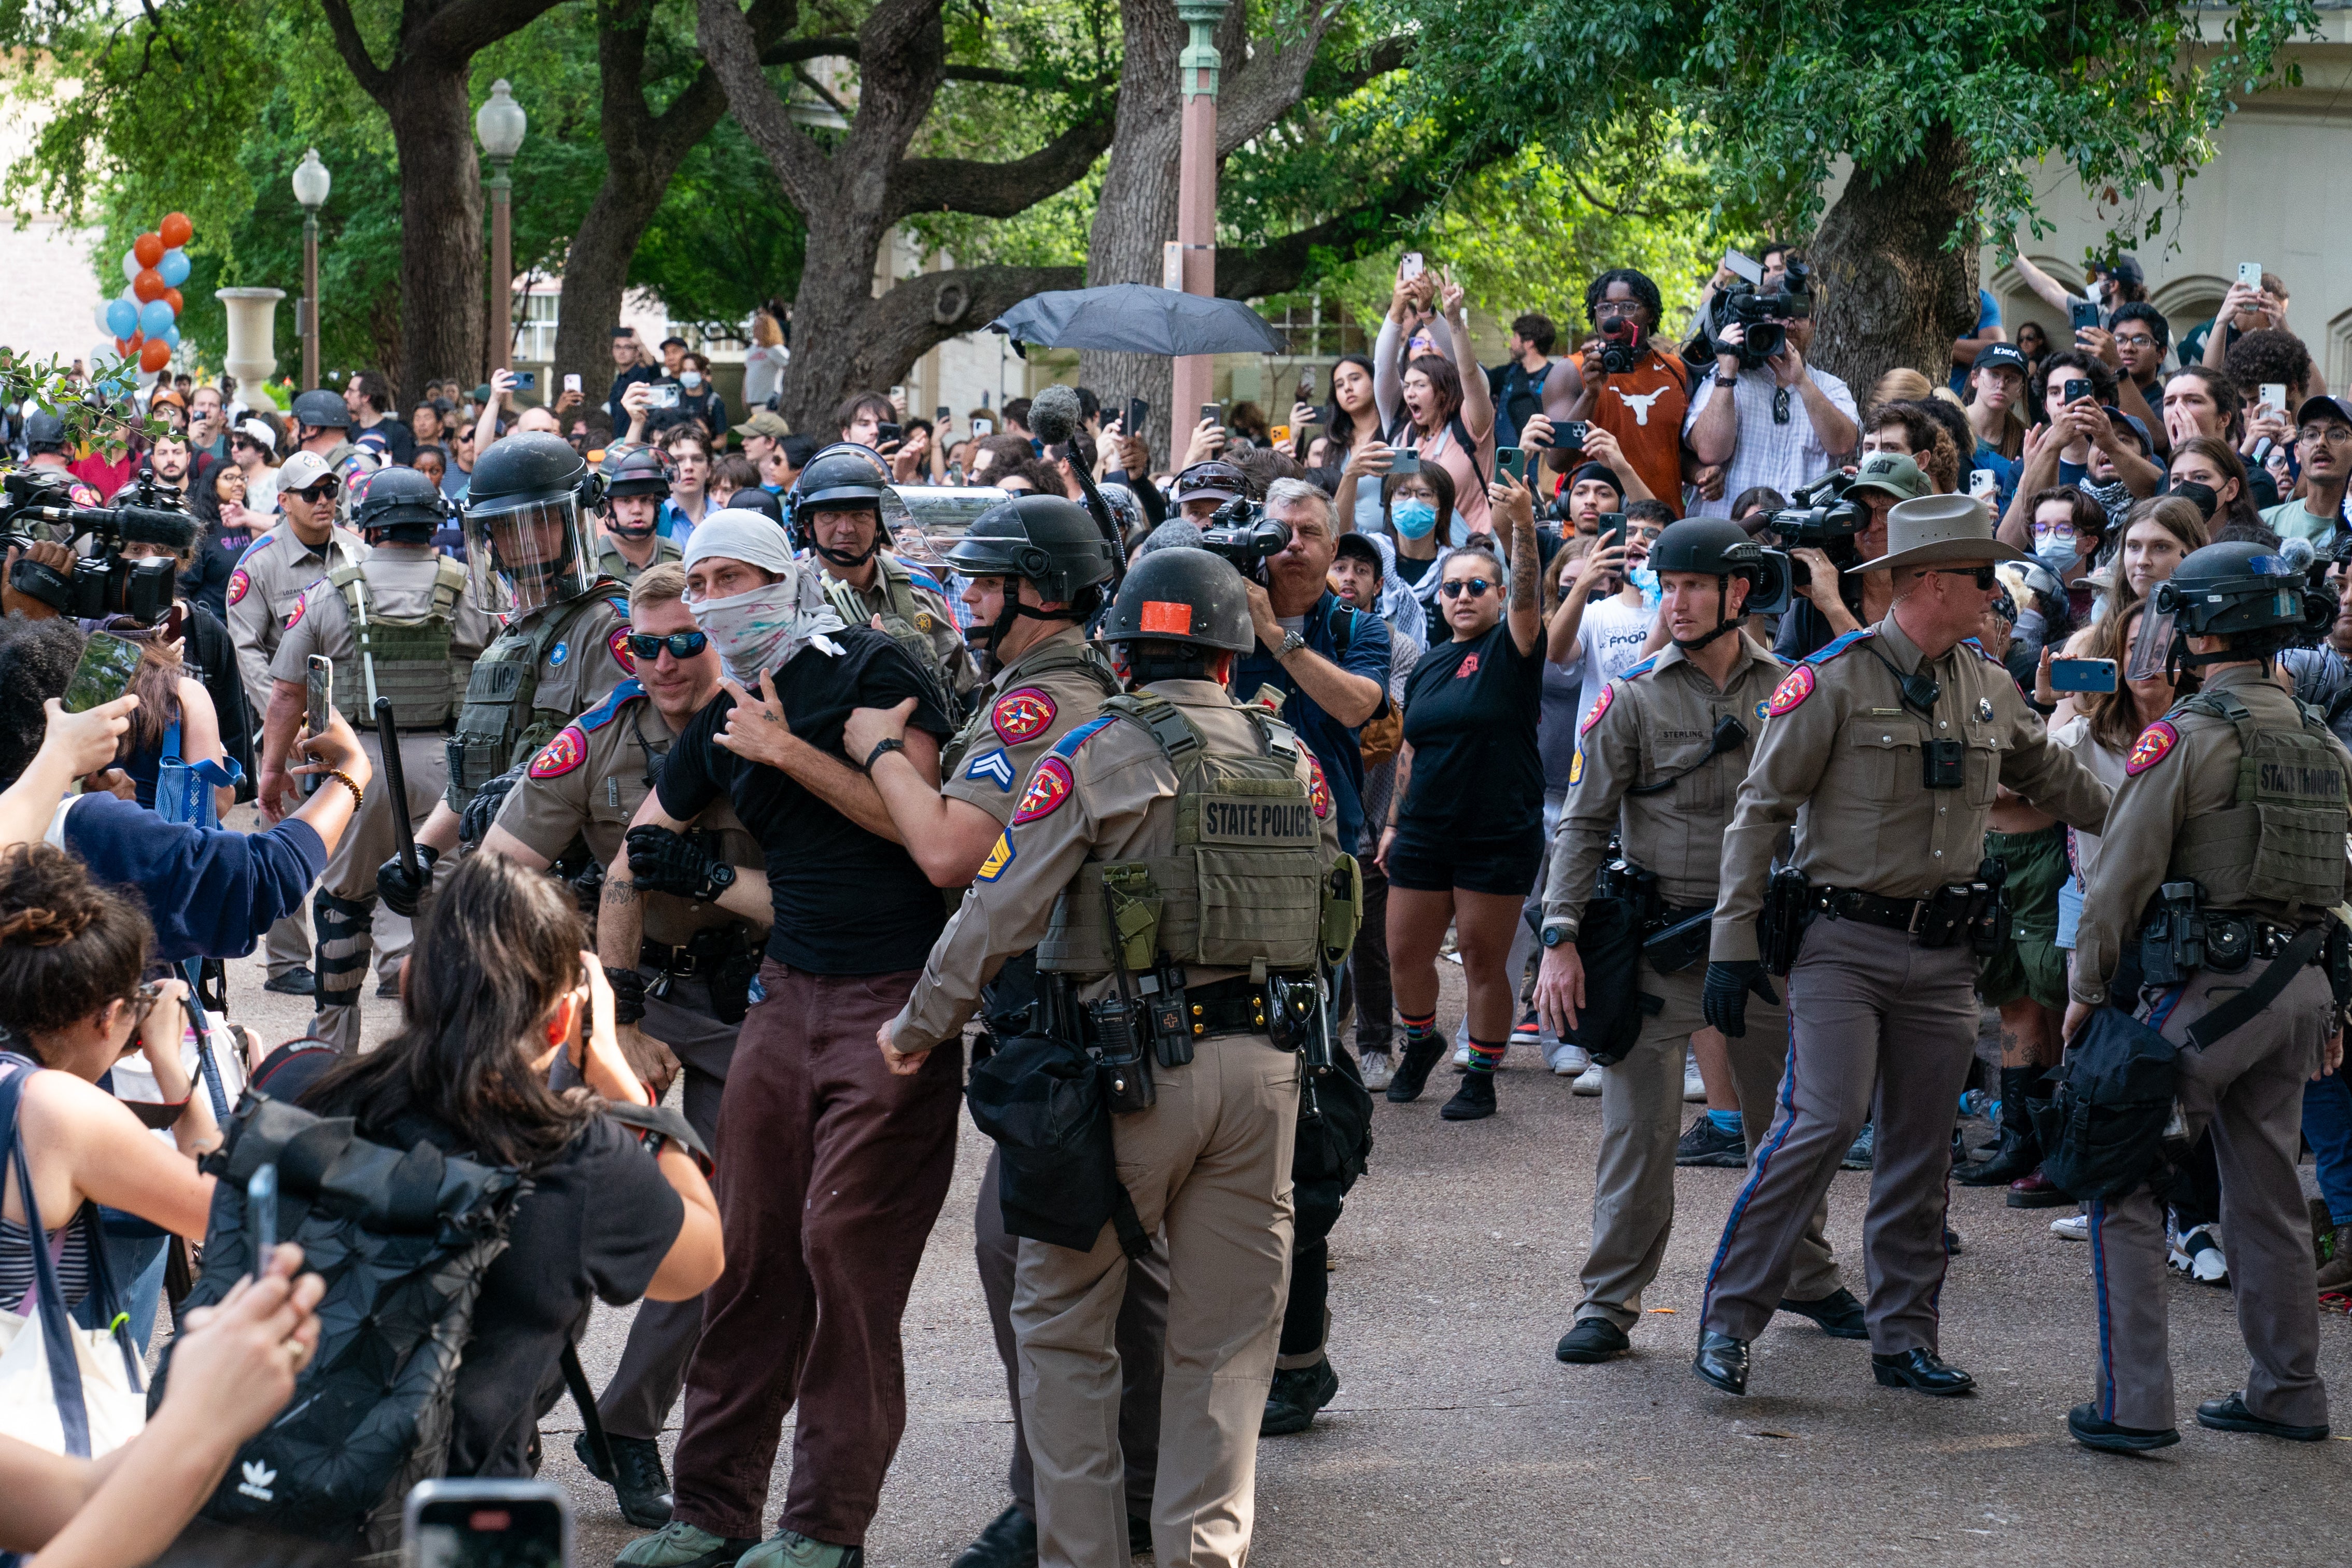 State troopers walk into a crowd of student protesters on a campus; most students are taking pictures; 3 officers are restraining one protester by both arms as other officers look on.